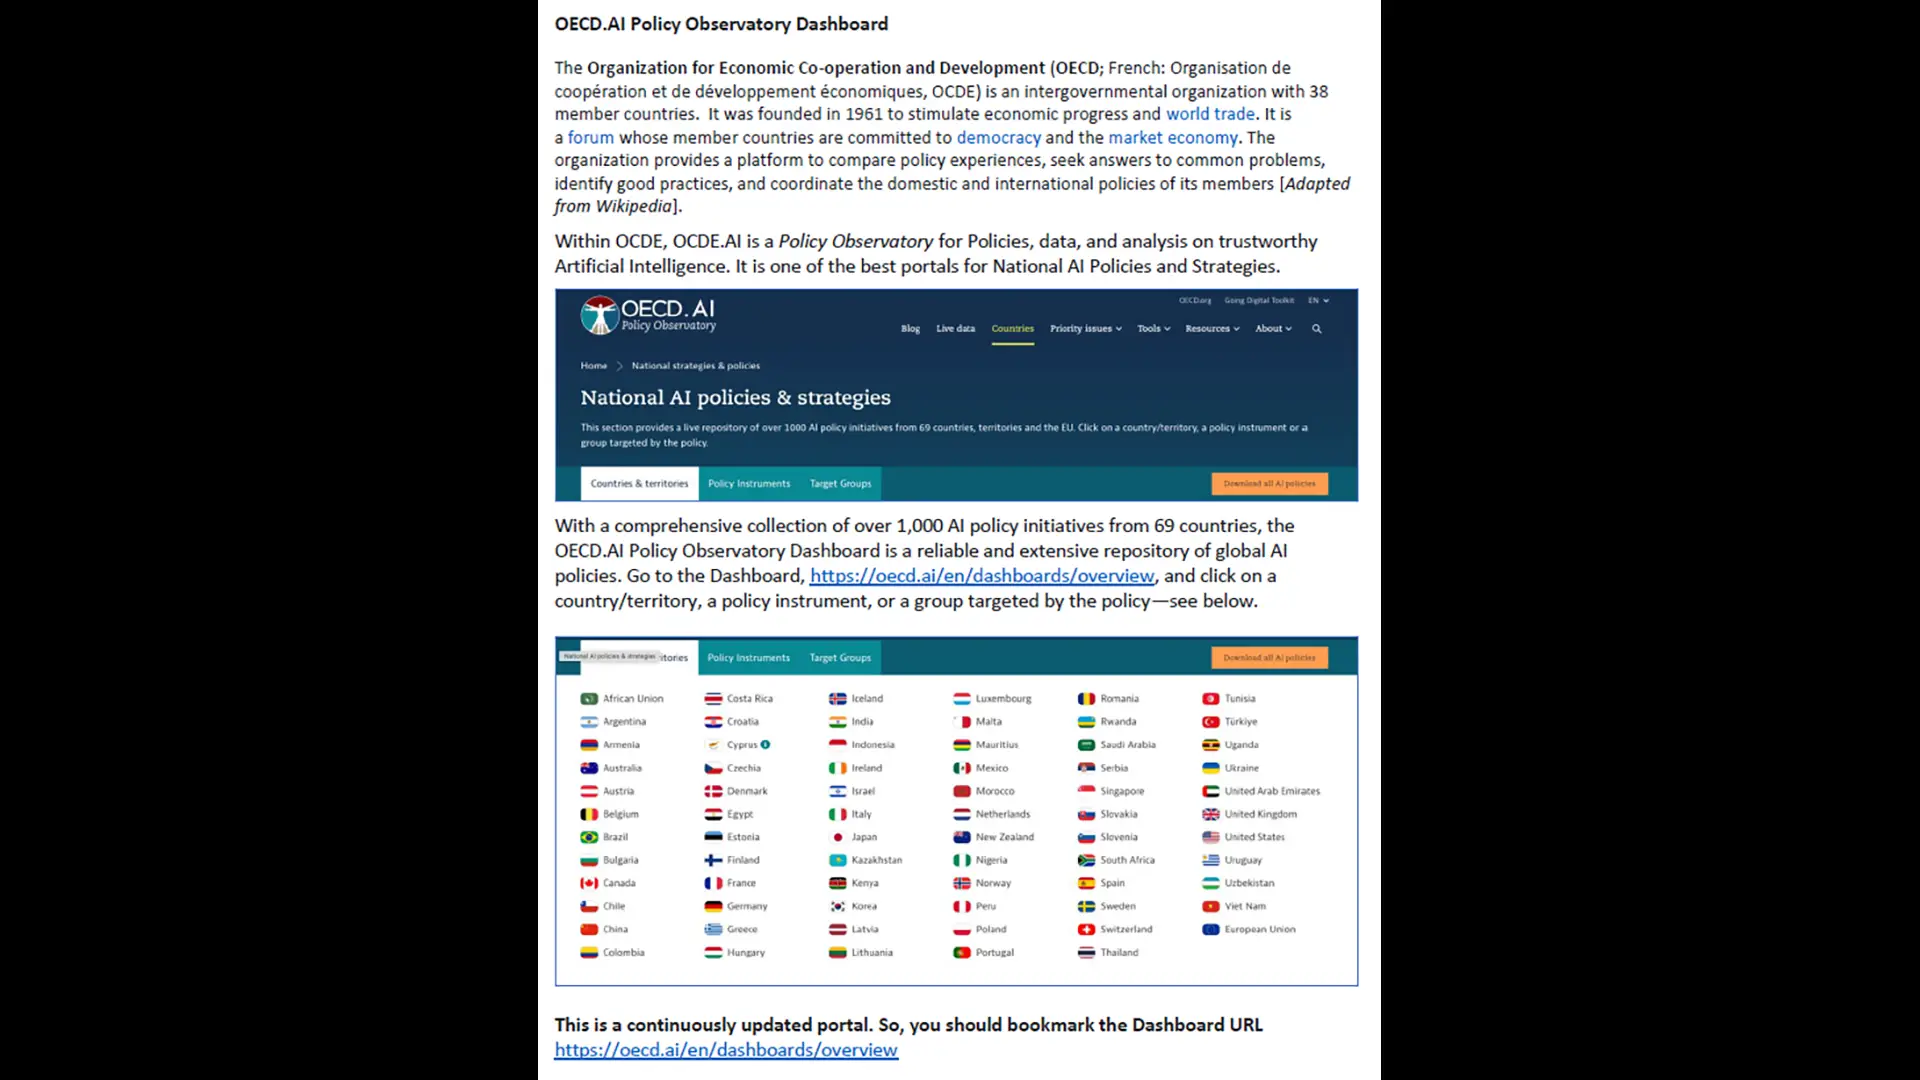 OECD.AI Policy Observatory Dashboard: Best Portal for National AI Policies and Strategies